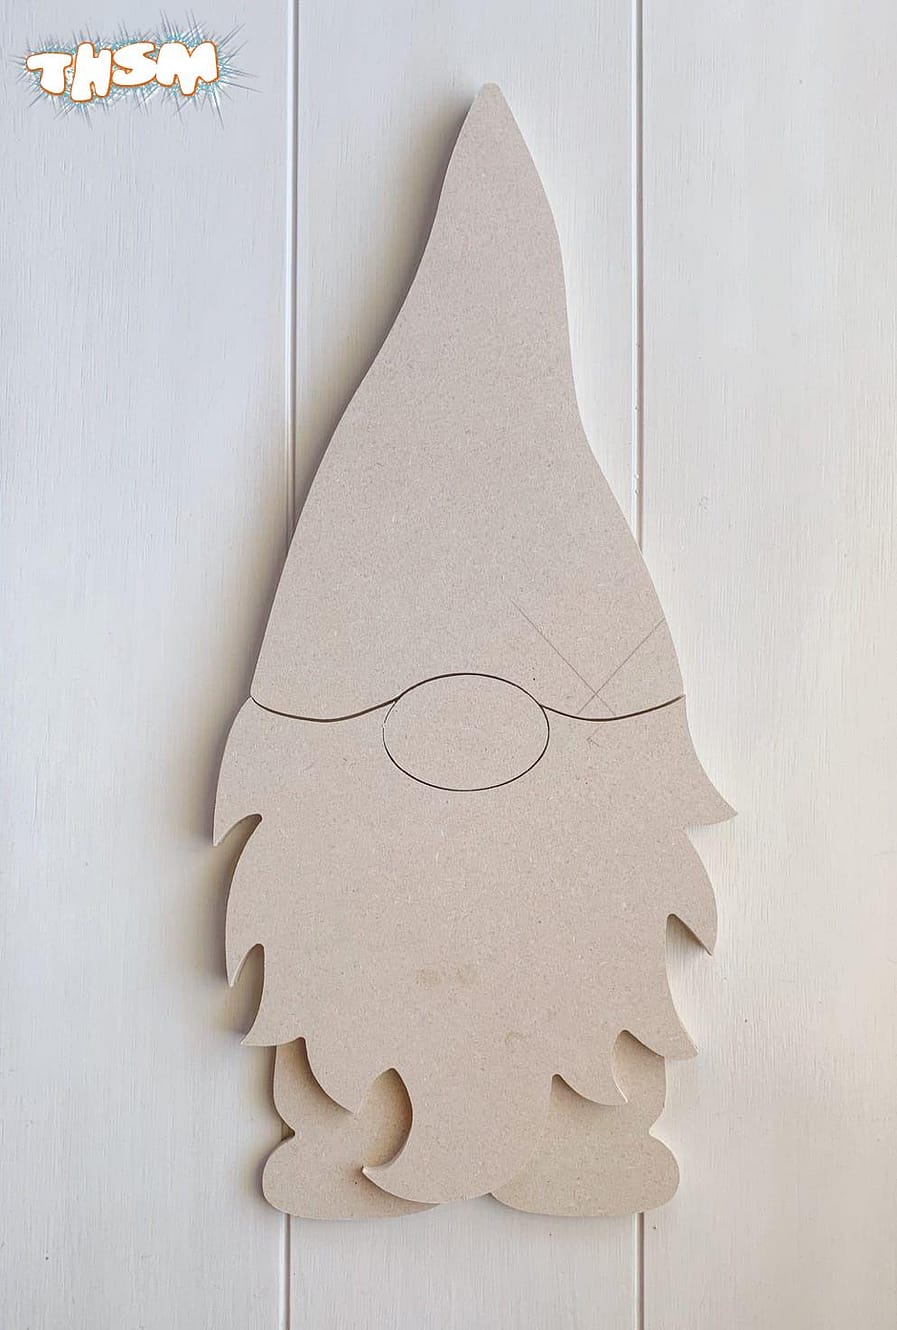 Laser Cut Christmas Gnome Ornament Free Vector